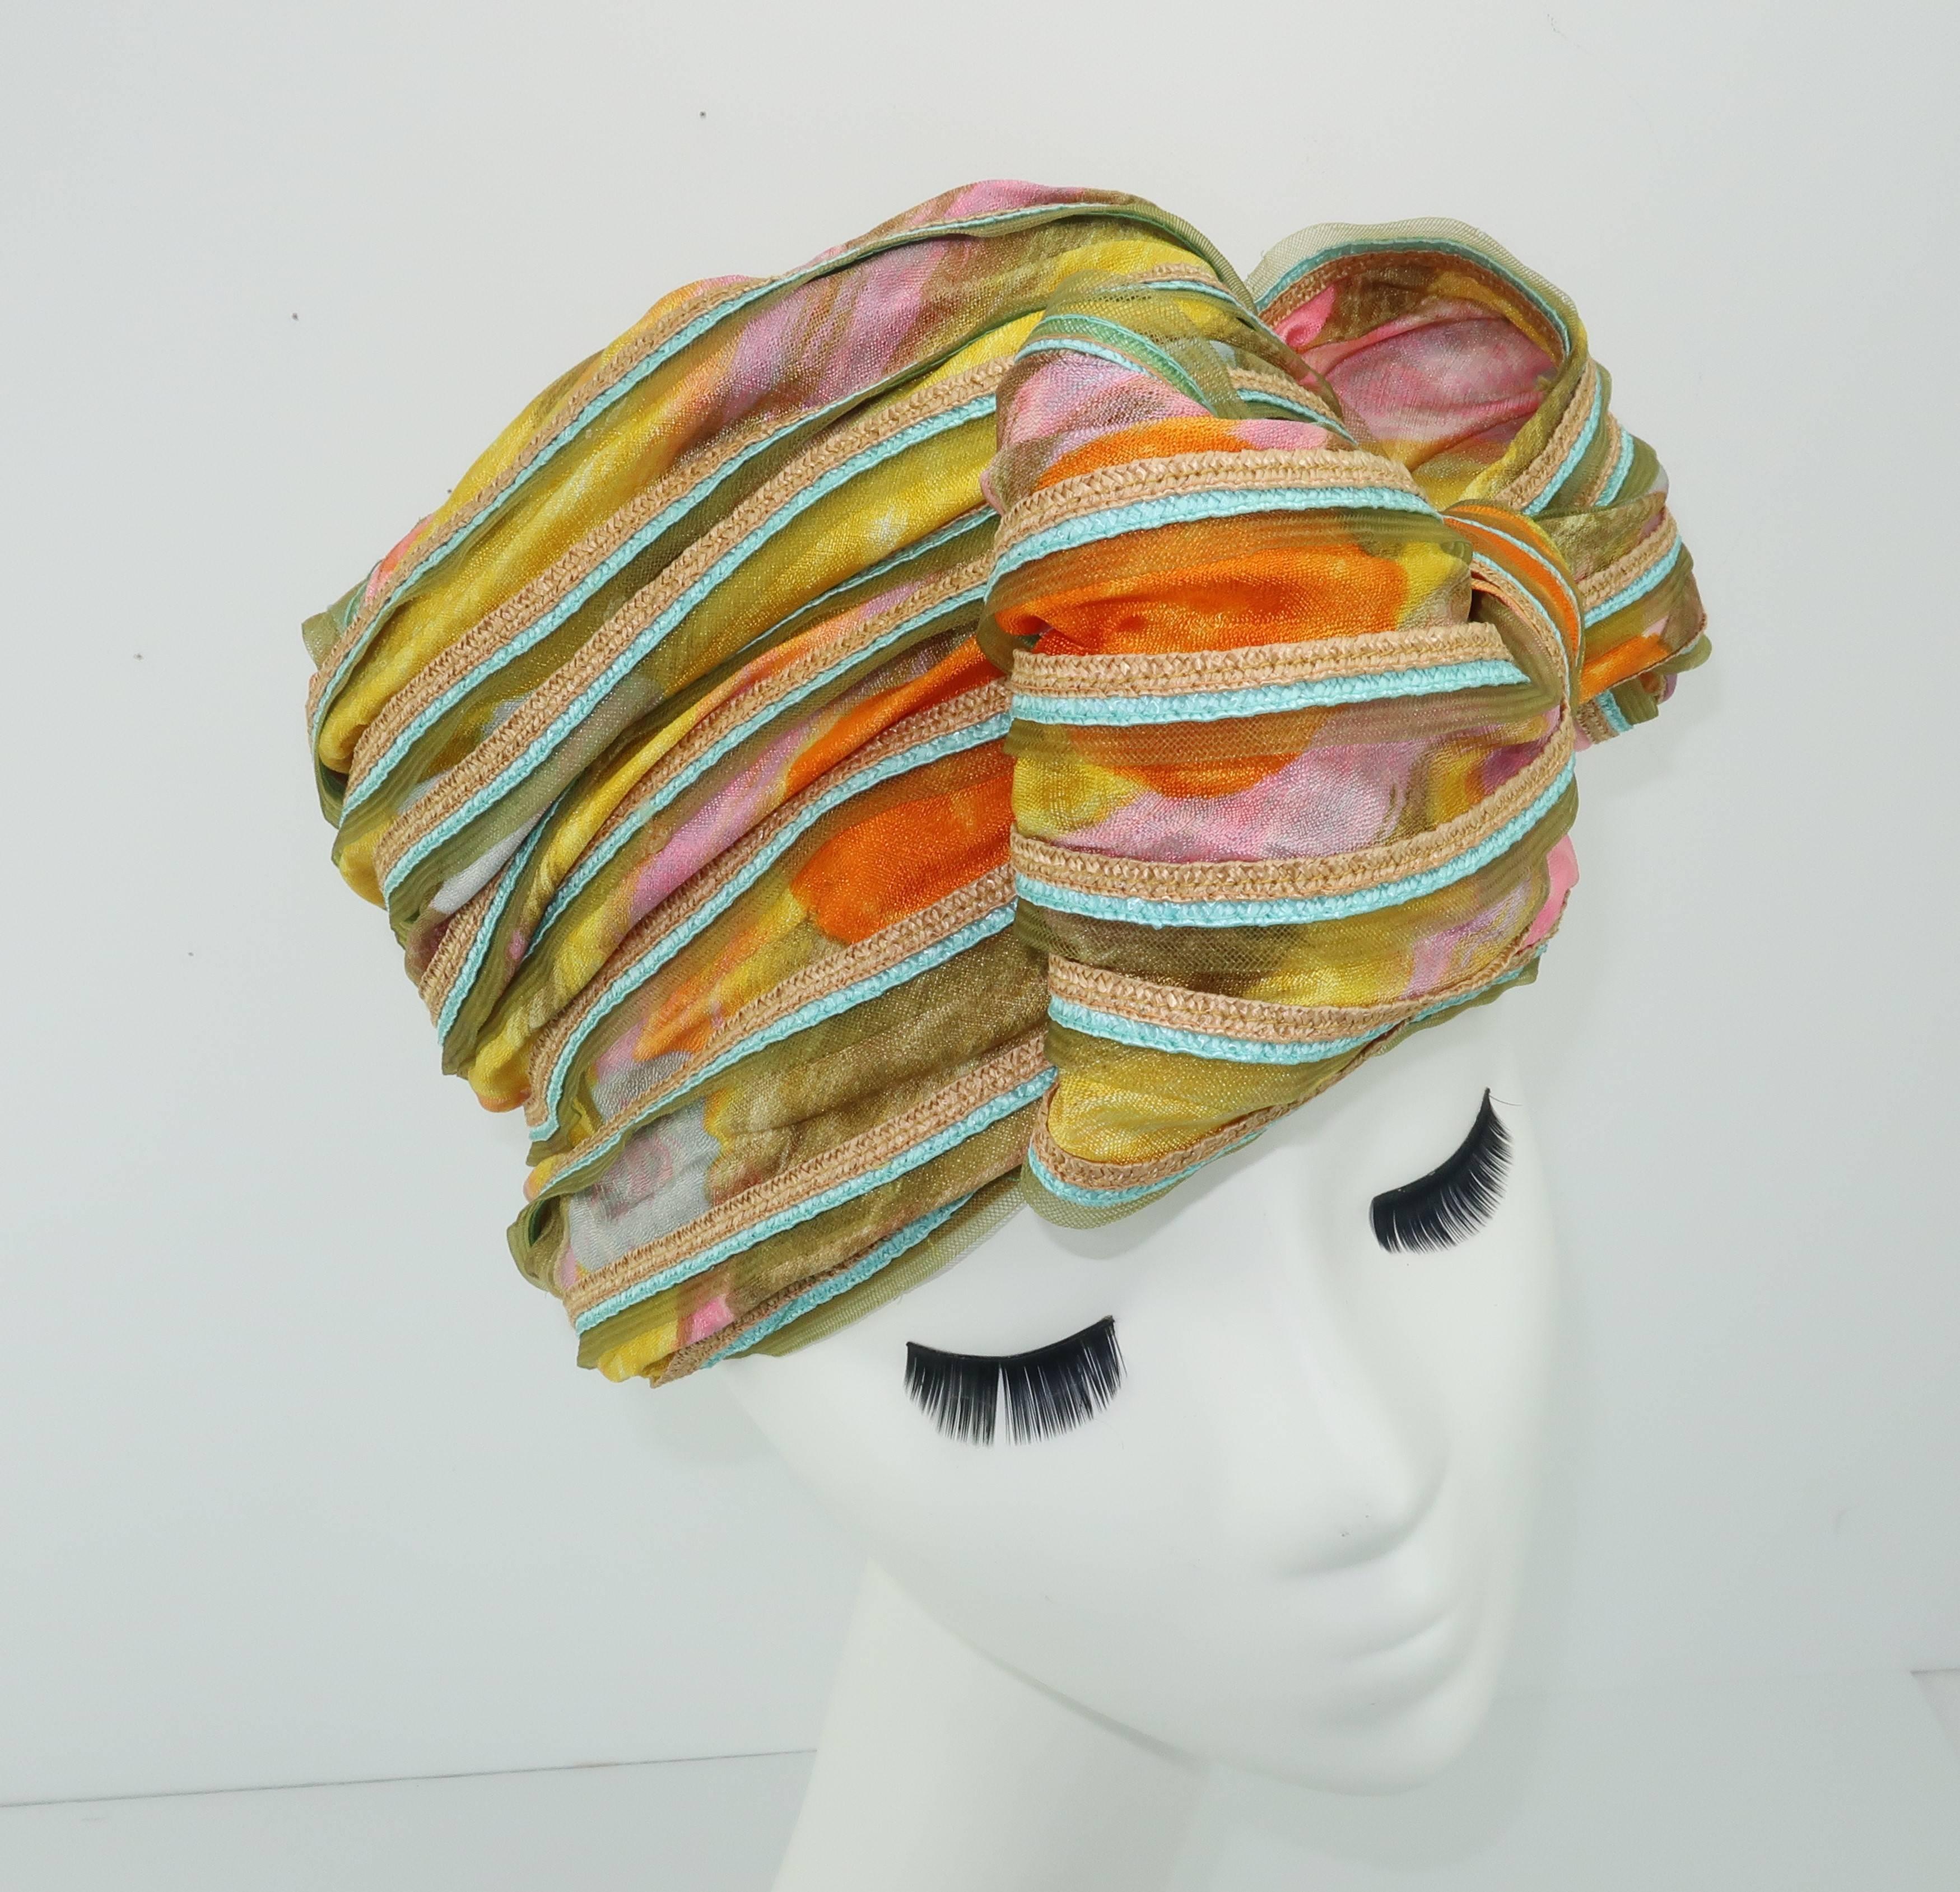 Beige Mr. John Jr. Floral Turban Style Hat With Straw Edging, 1960s 